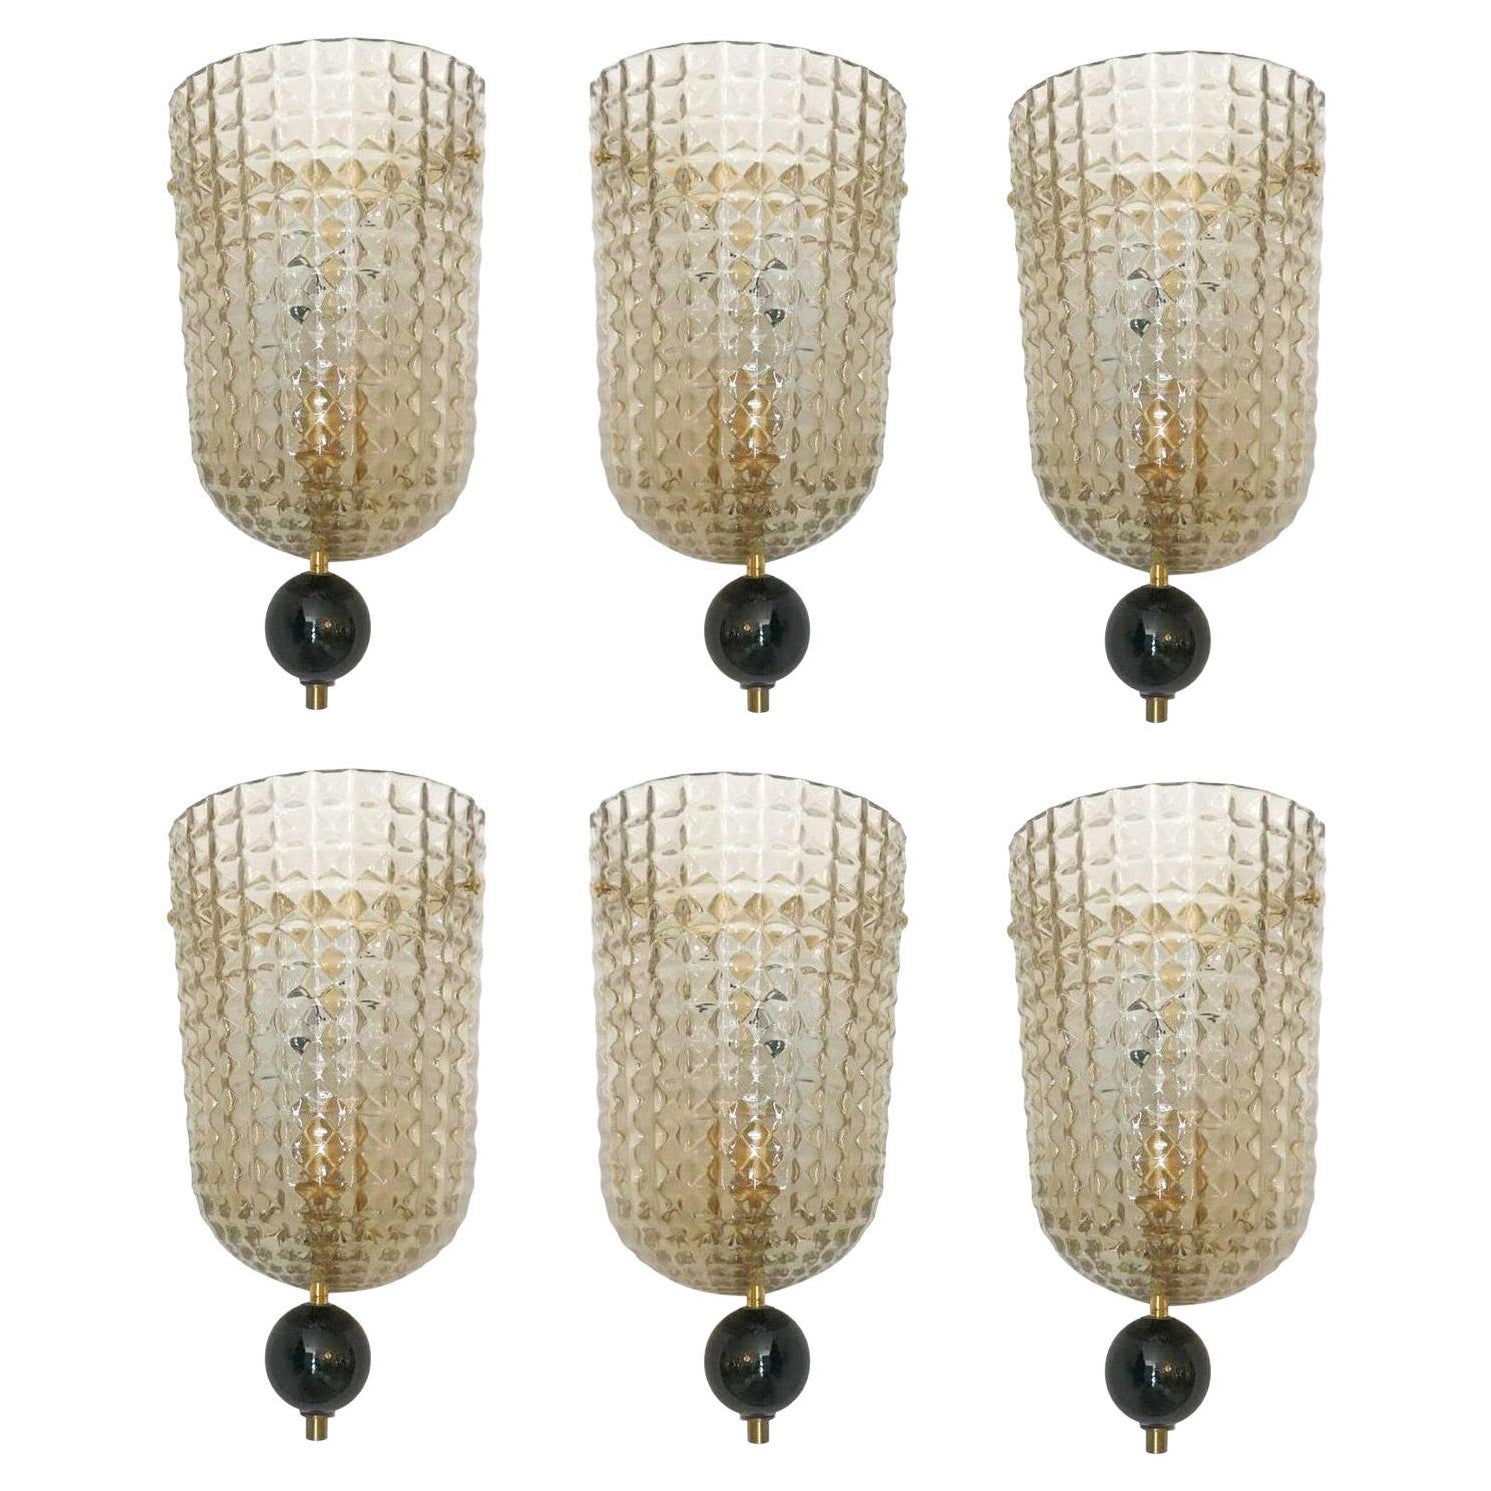 Set of Six Art Deco Style Murano Glass Demi-Lune Wall Lights Sconces, in Stock